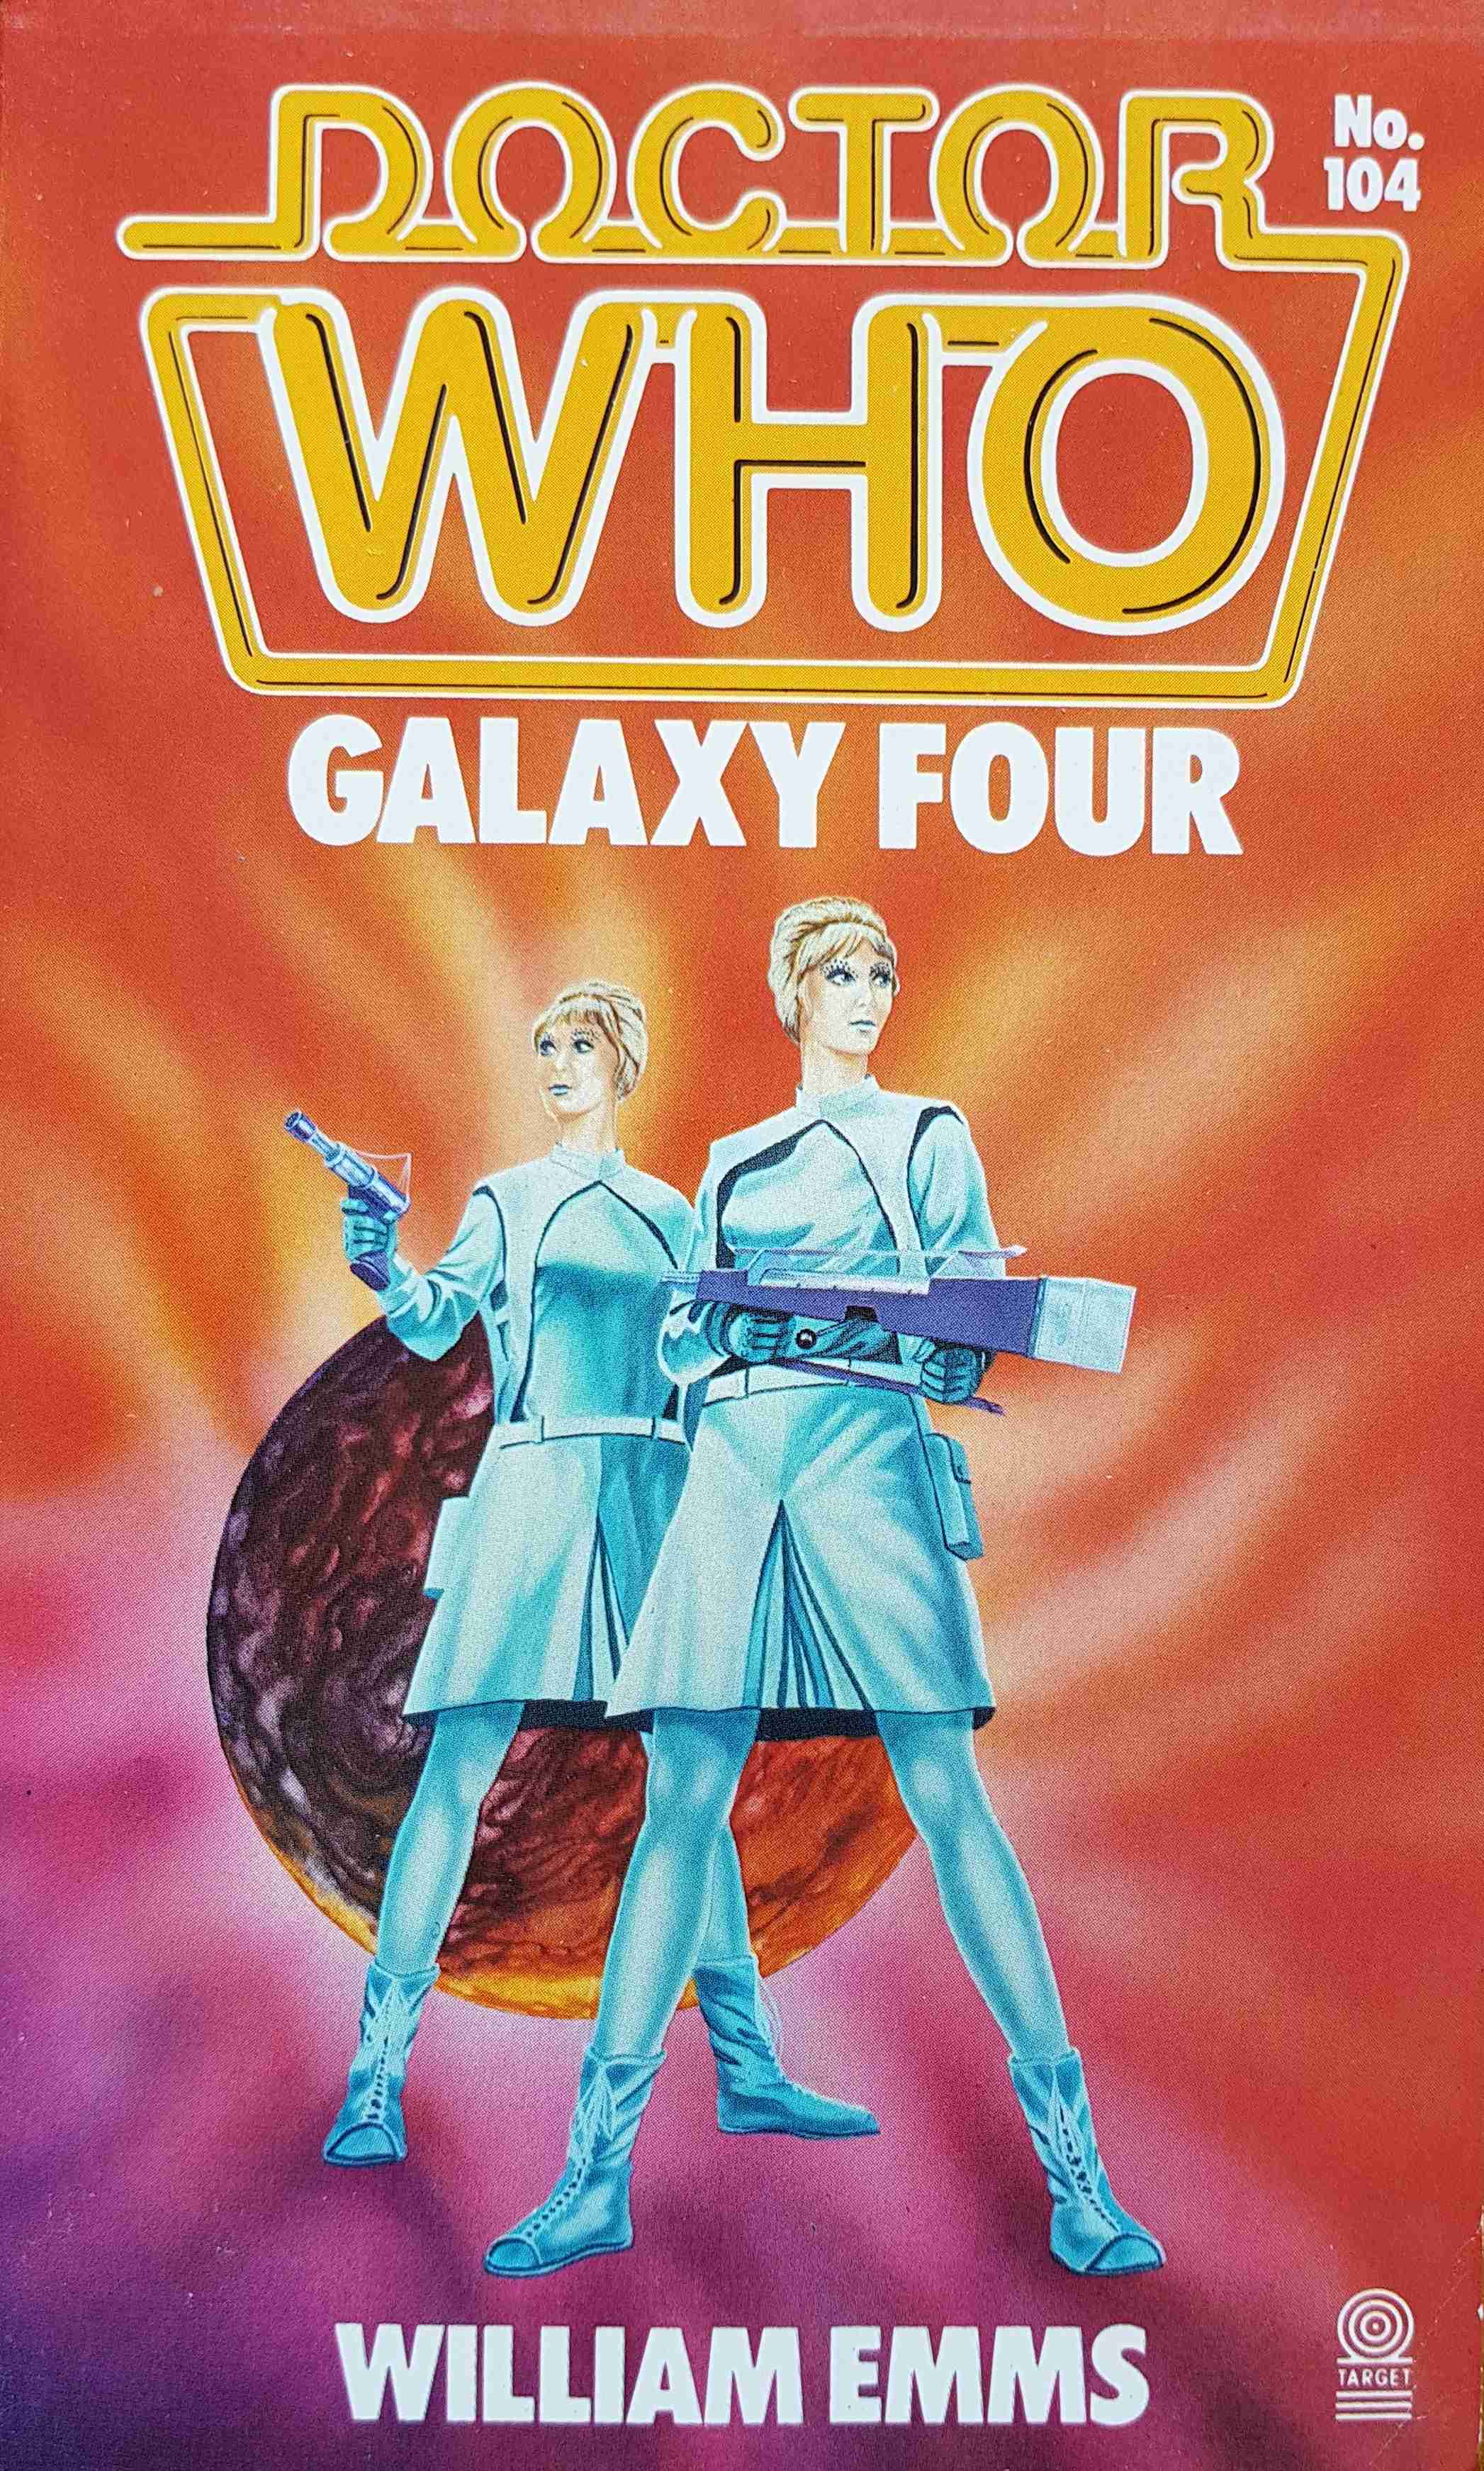 Picture of 0-426-20202-3 Doctor Who - Galaxy four by artist William Emms from the BBC records and Tapes library